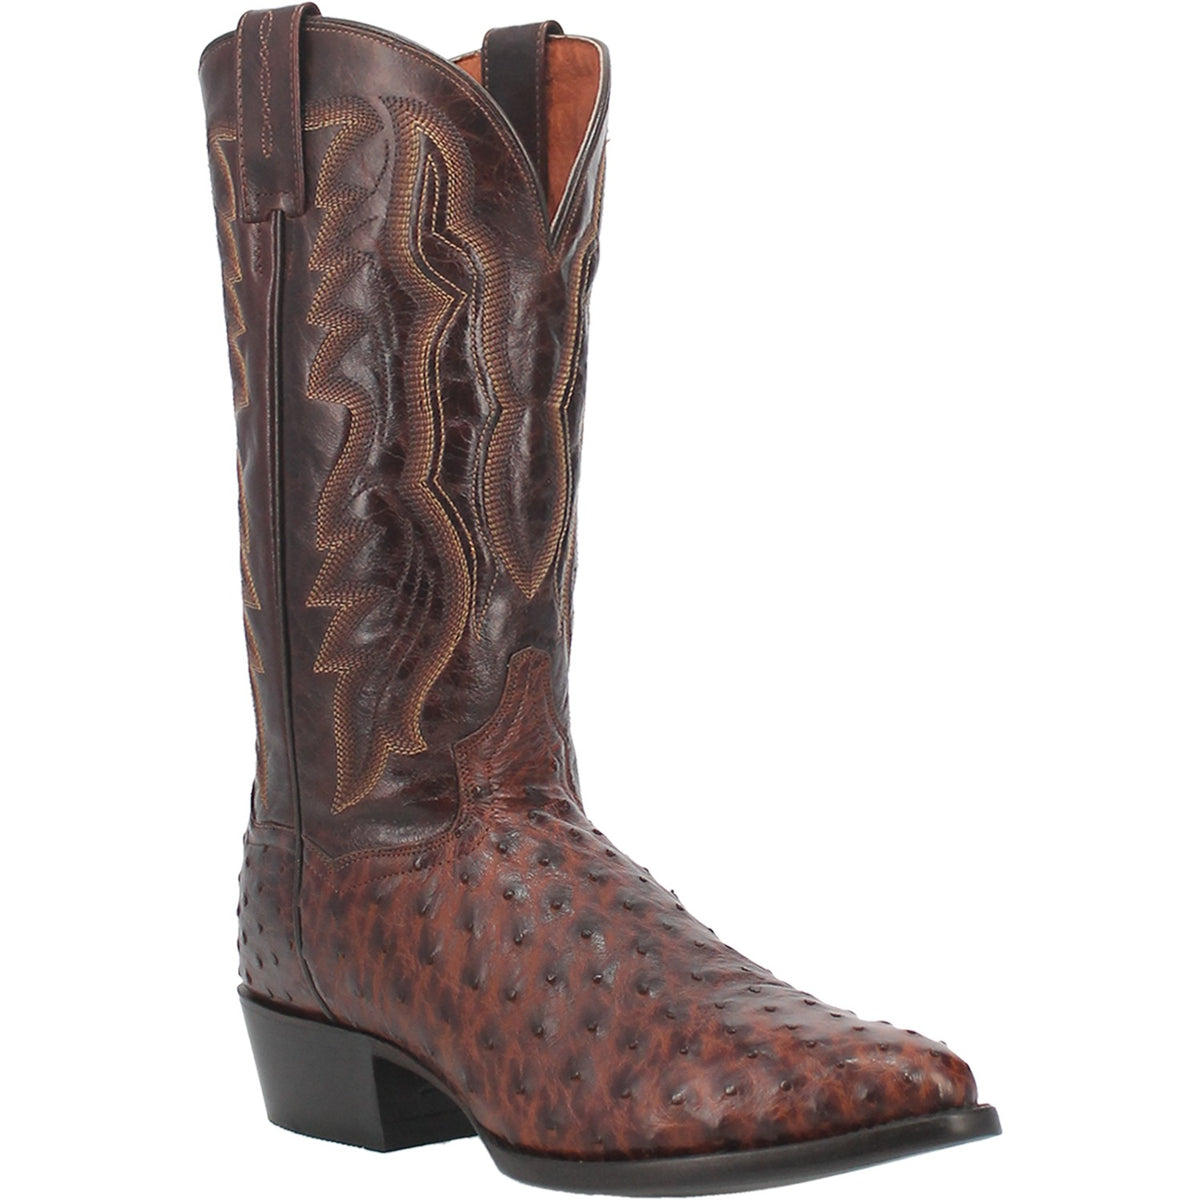 PERSHING FULL QUILL OSTRICH BOOT Cover